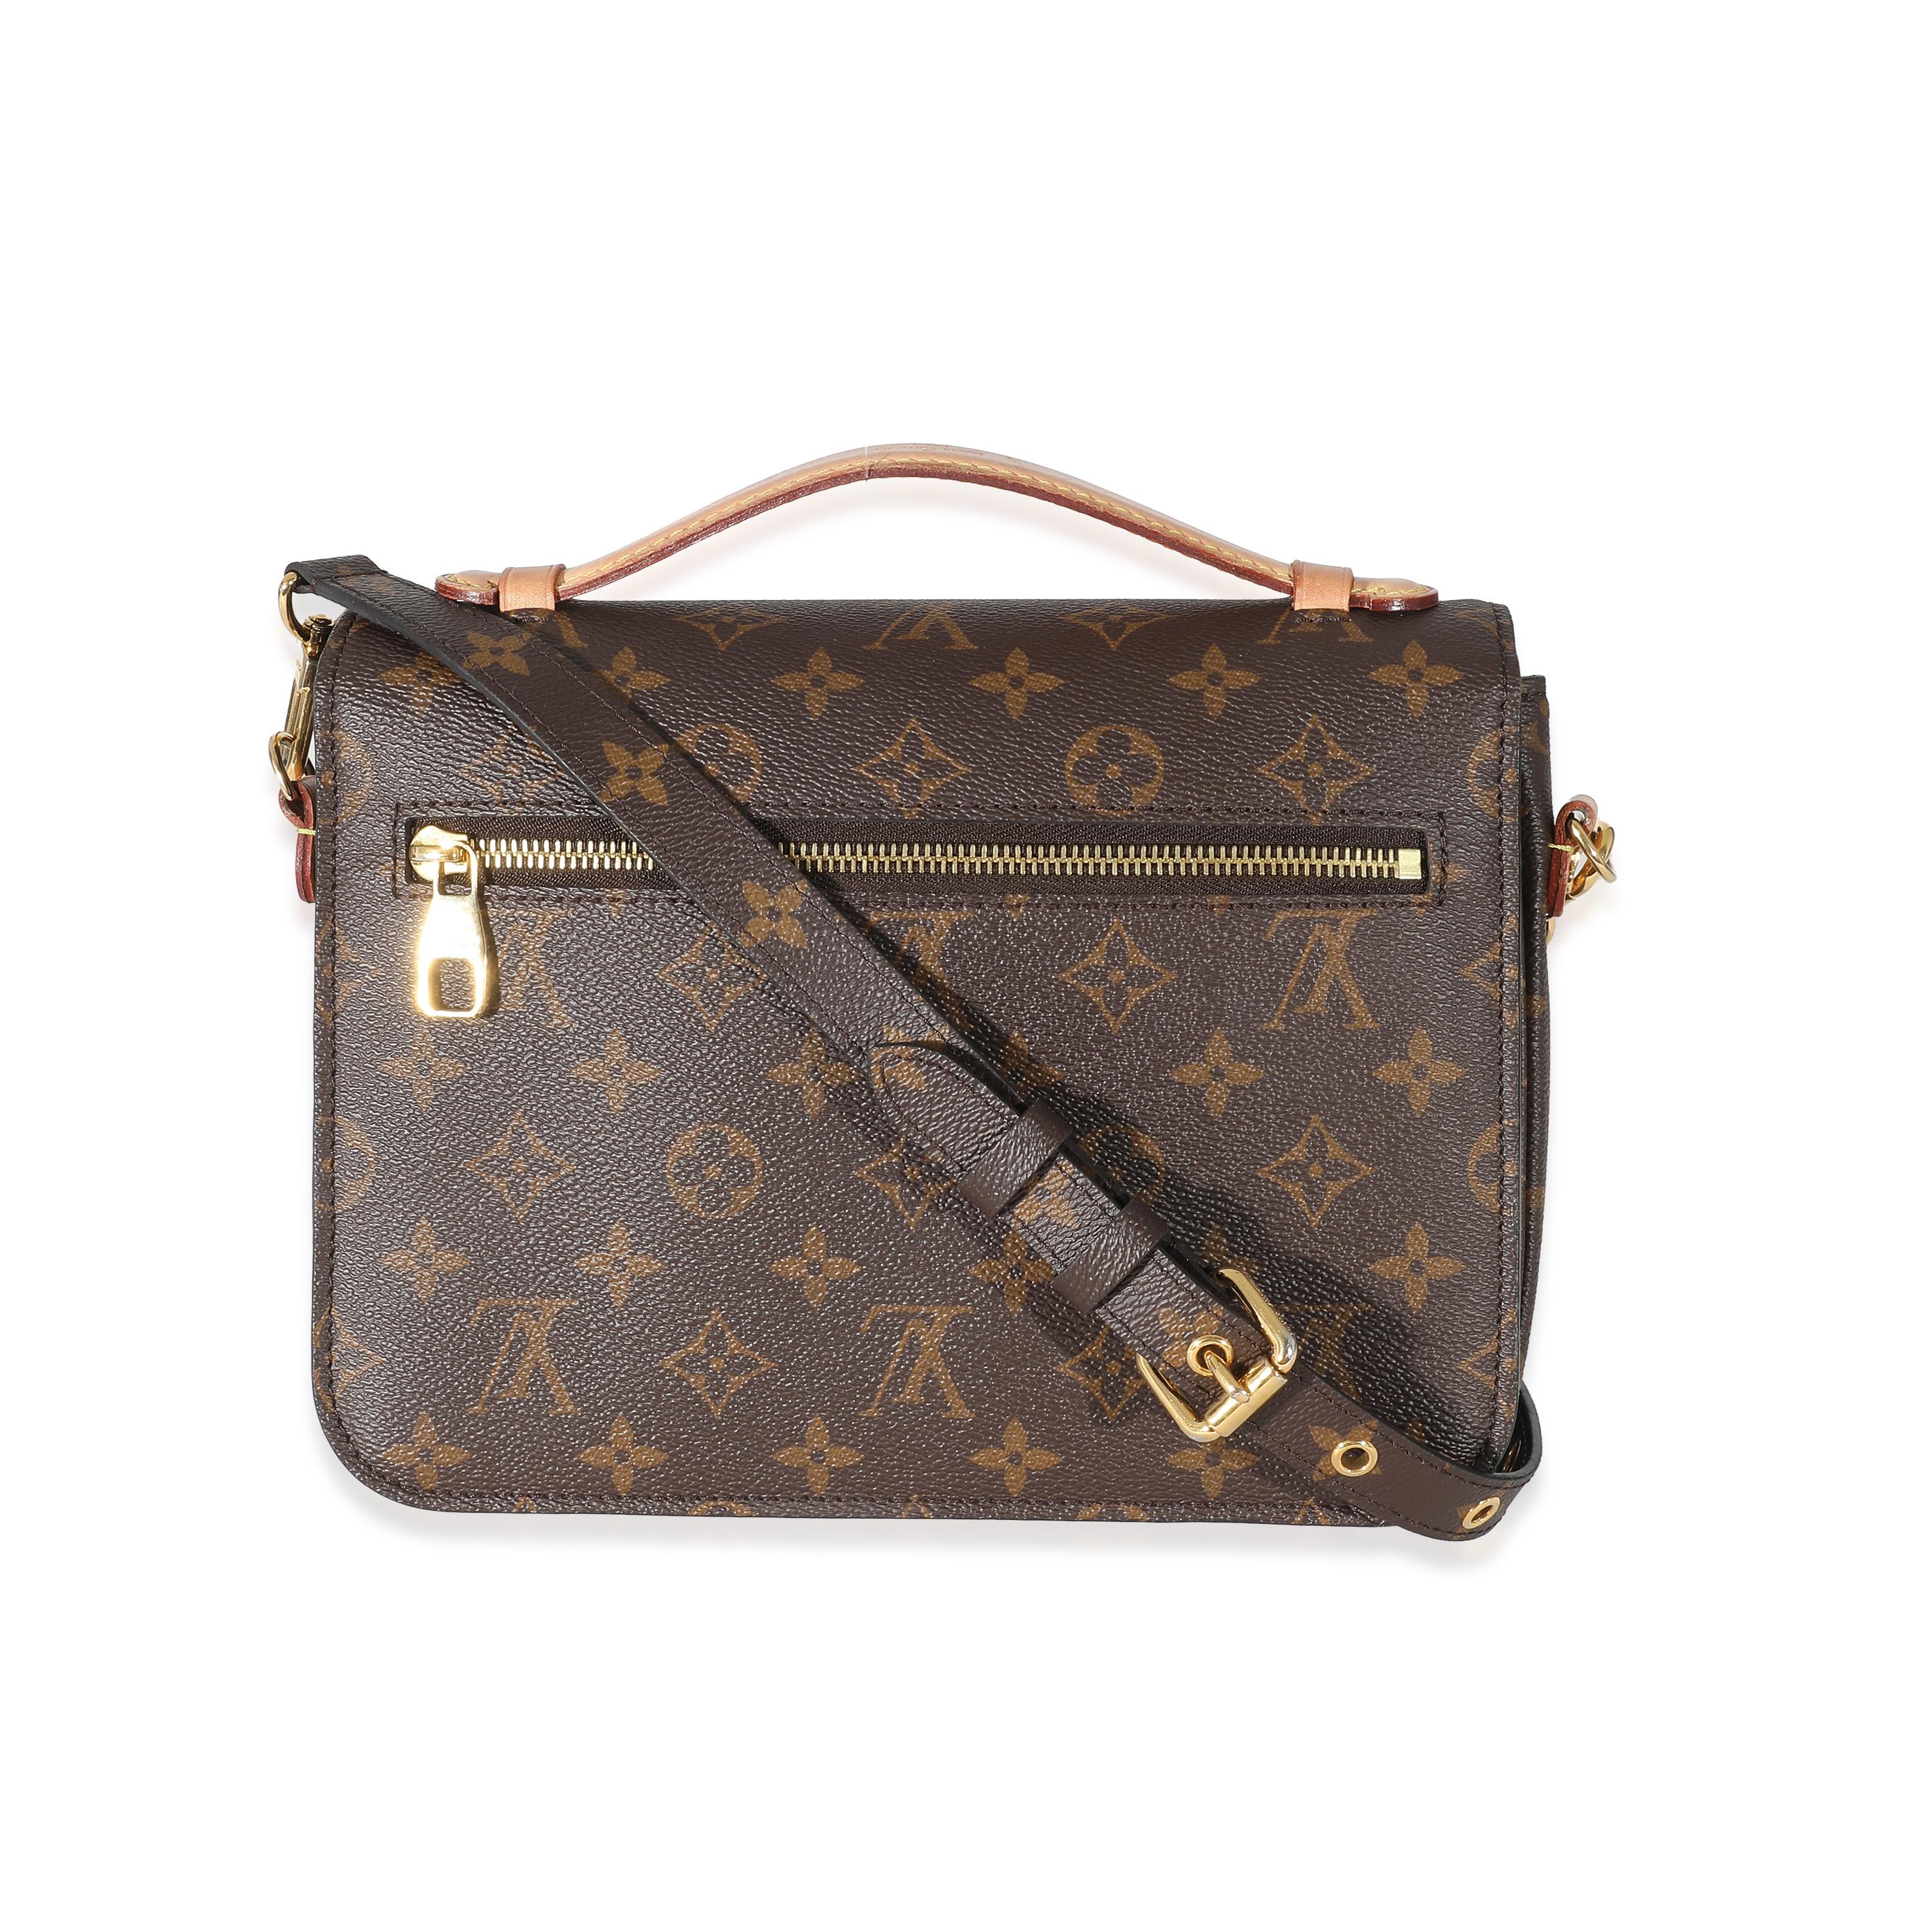 Listing Title: Louis Vuitton Monogram Canvas Pochette Metis
SKU: 134154
MSRP: 2570.00 USD
Condition: Pre-owned 
Handbag Condition: Good
Condition Comments: Item is in good condition with apparent signs of wear. Extensive watermarks throughout